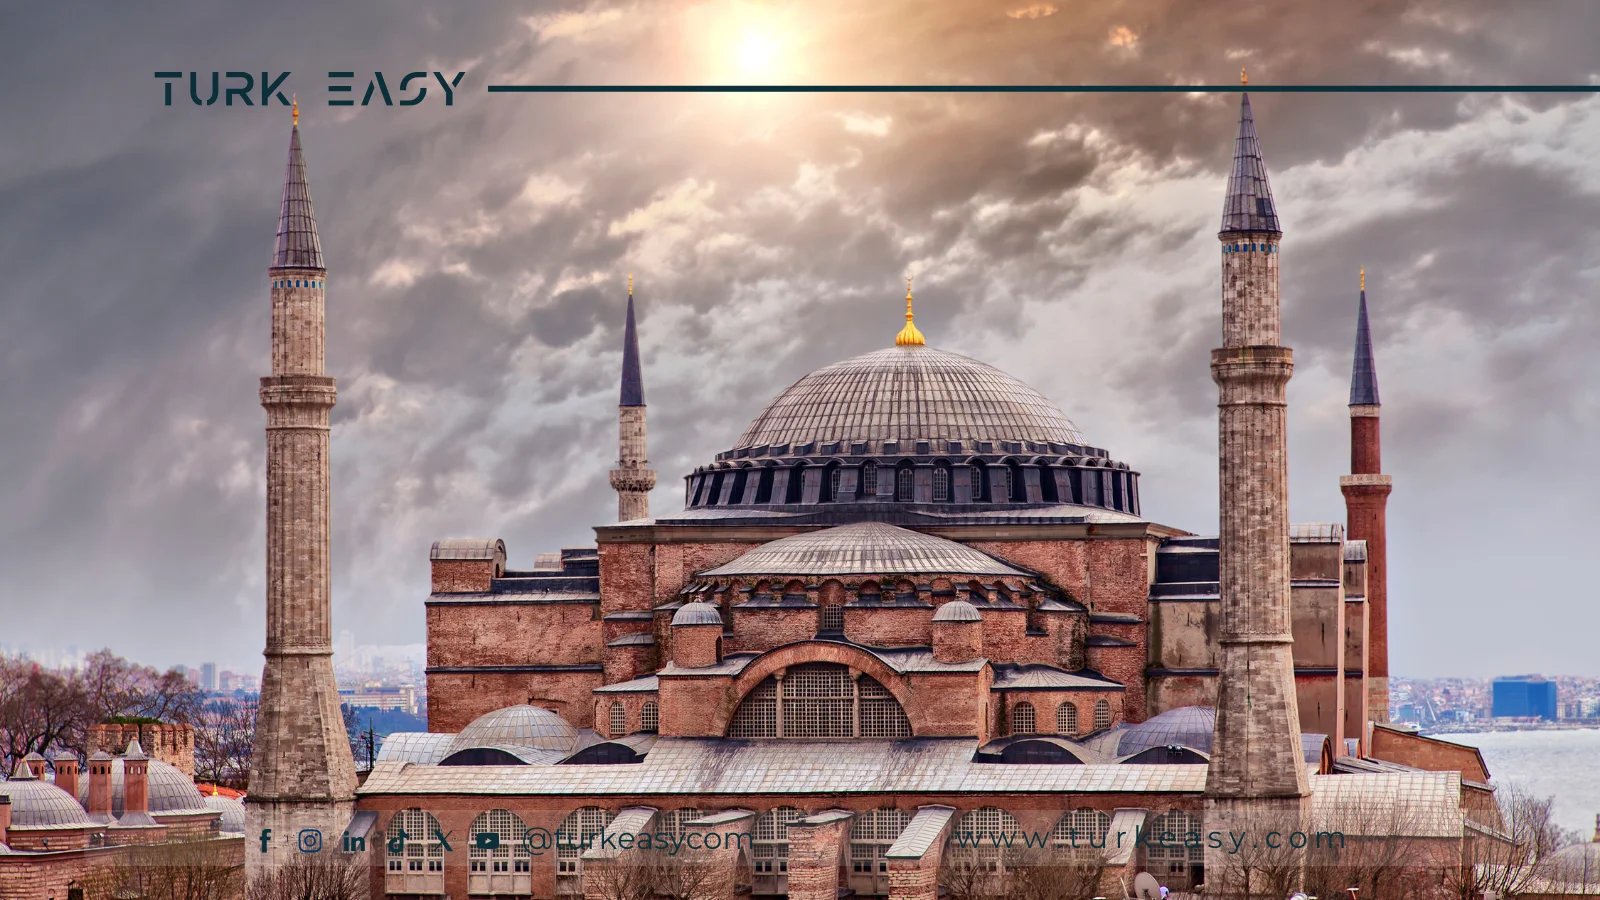 guide/details-about-ayasofya-mosque-in-istanbul.webp